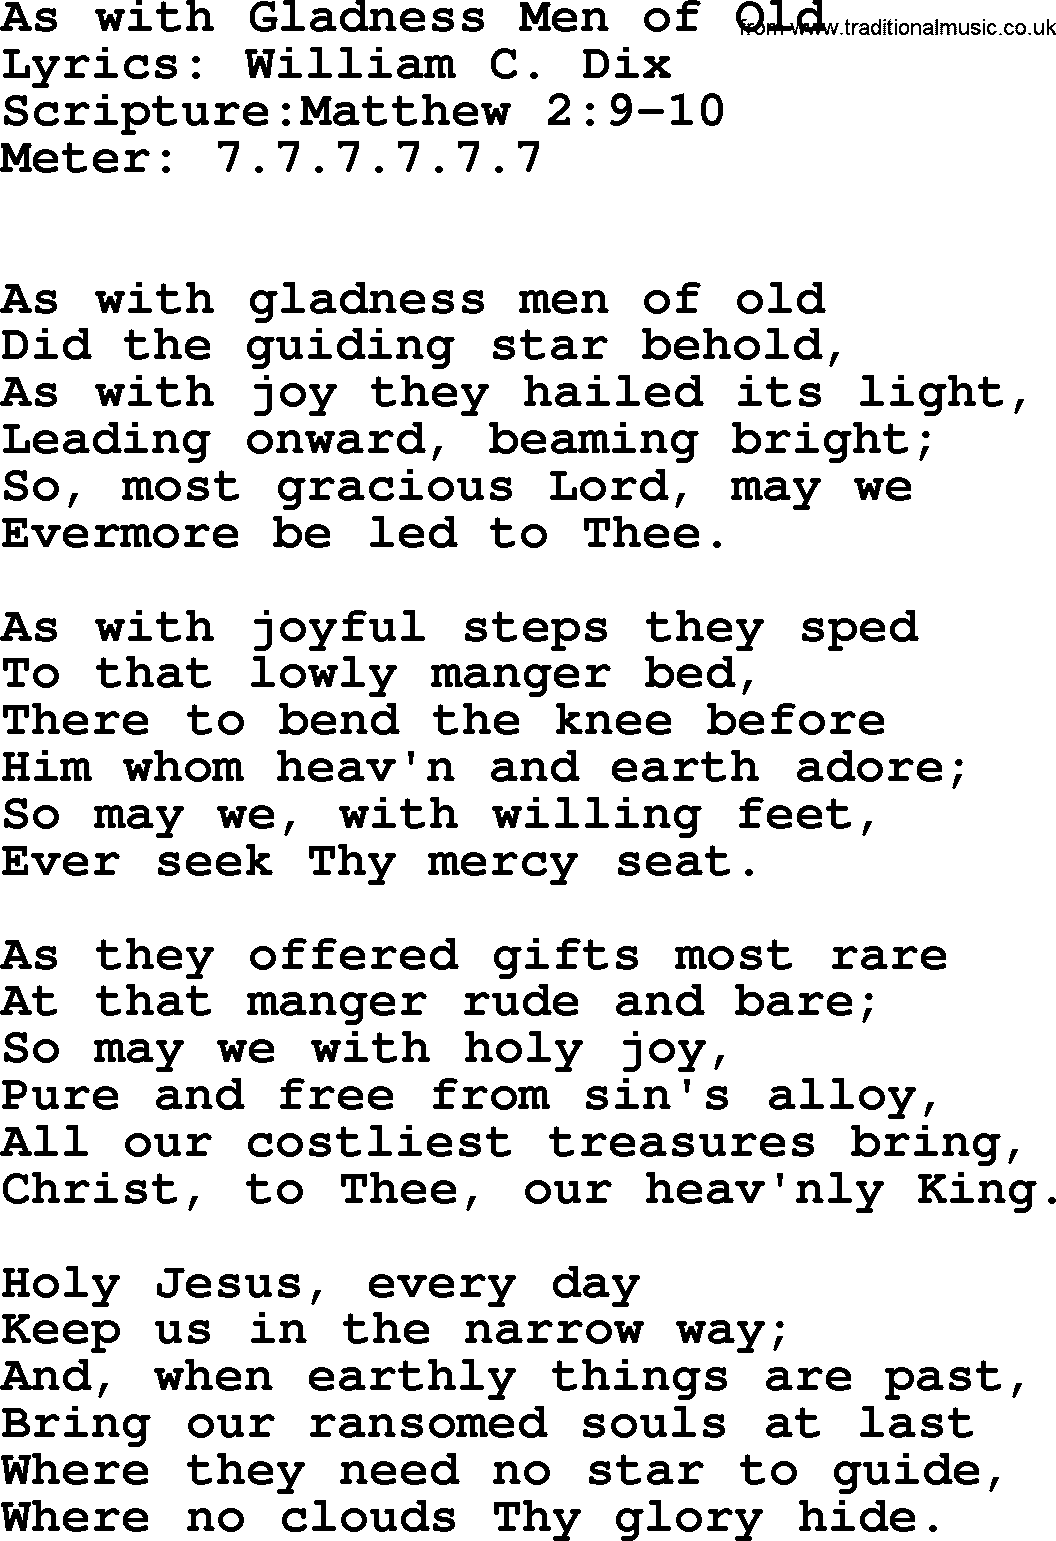 Hymns about  Angels, Hymn: As with Gladness Men of Old, lyrics, sheet music, midi & Mp3 music with PDF